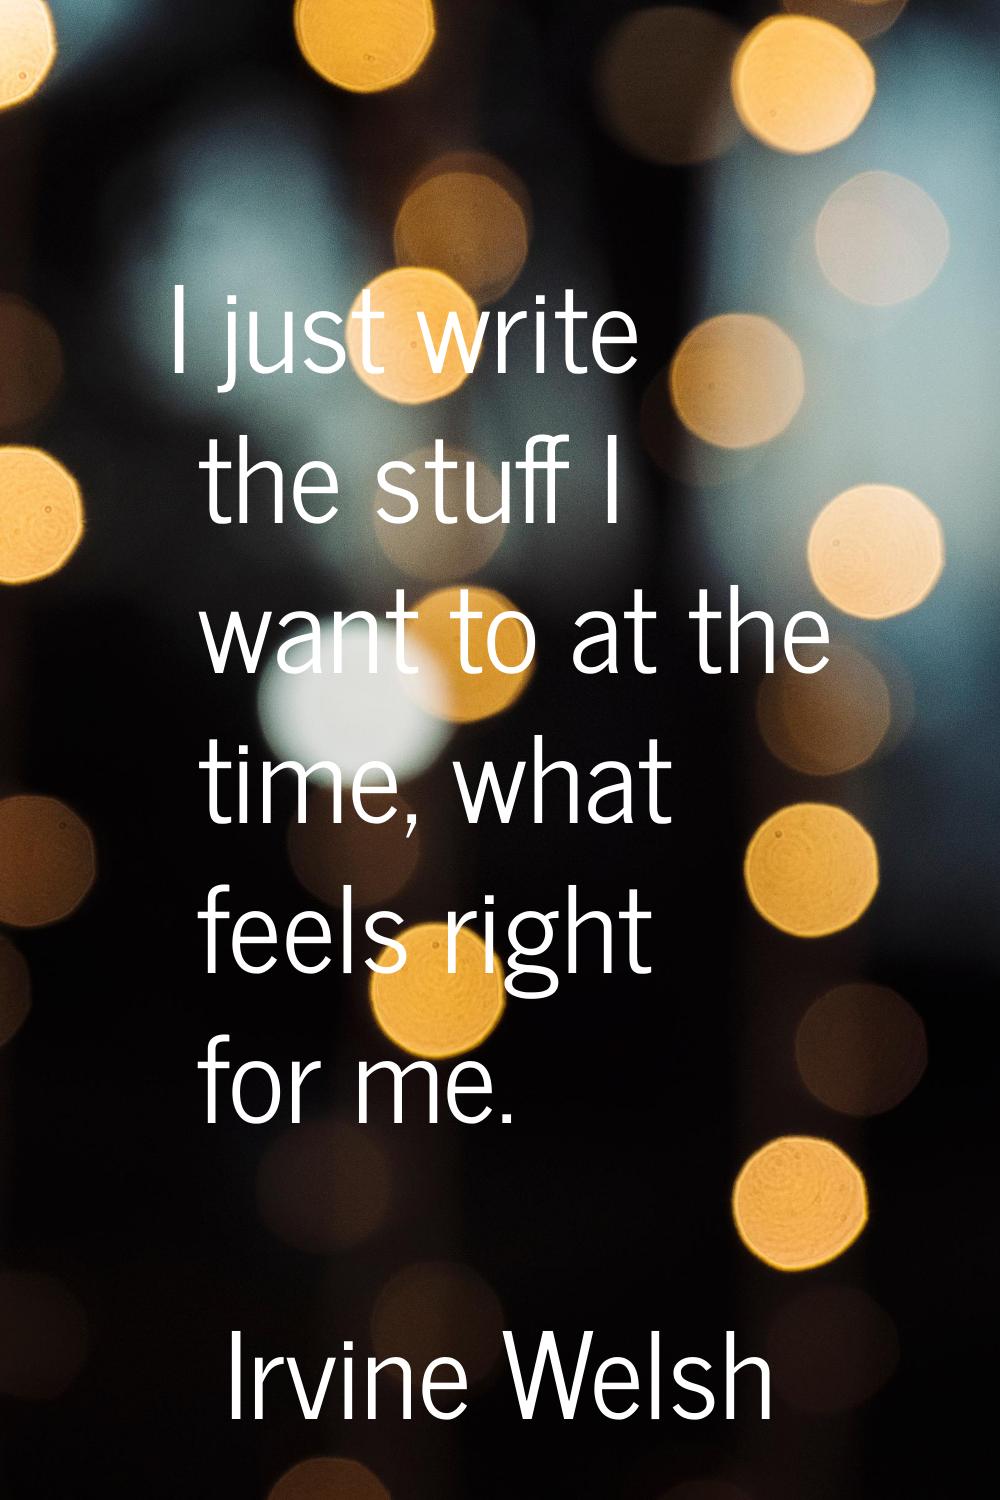 I just write the stuff I want to at the time, what feels right for me.